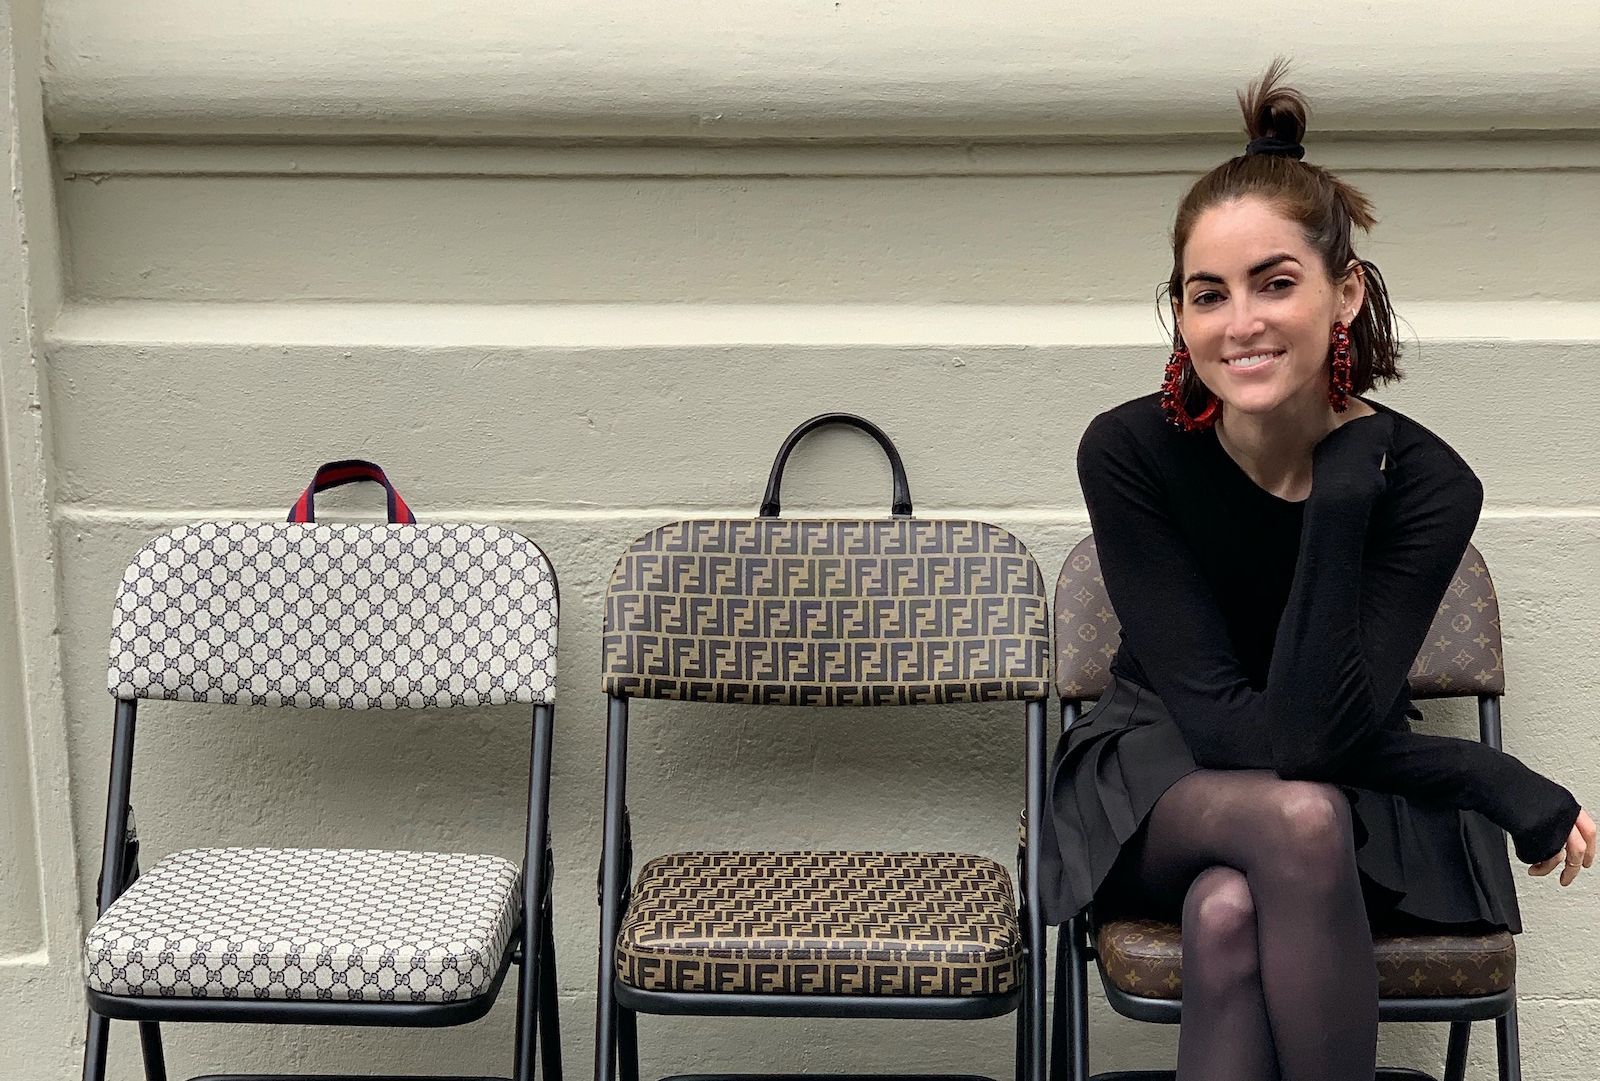 The artist turning old Louis Vuitton bags into pieces of furniture